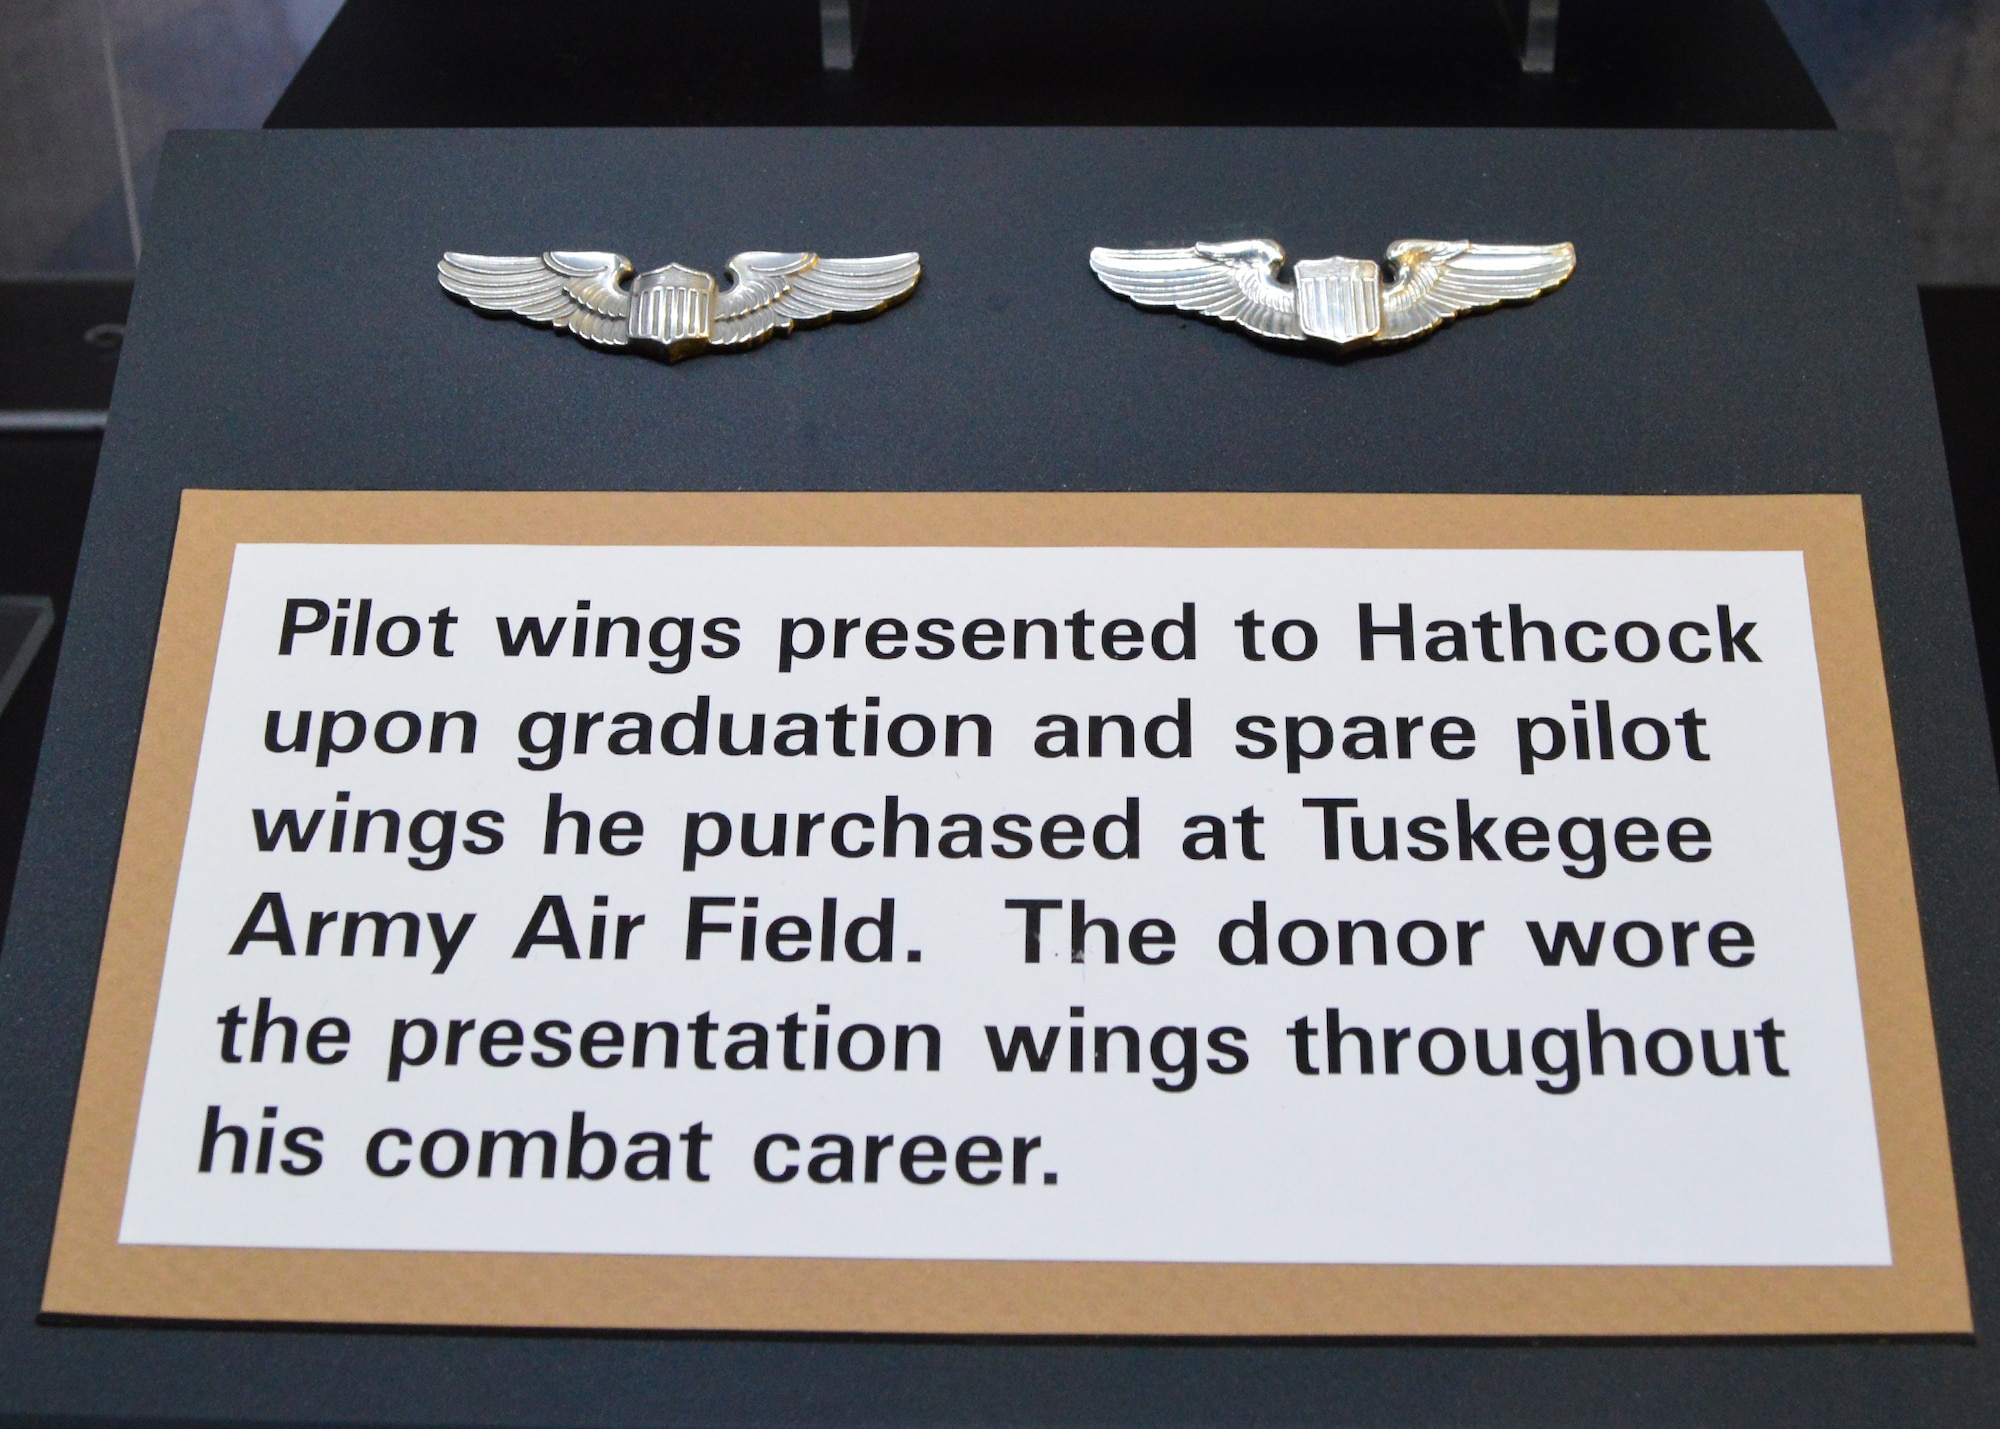 DAYTON, Ohio -- Lt. Hathcock's pilot wings on display in the WWII Gallery at the National Museum of the U.S. Air Force. Captured in Italy during the summer of 1944, Lt. (later Maj.) Lloyd "Scotty" Hathcock spent the rest of the war in Stalag Luft III and Stalag VII-A prison camps. After the war, Hathcock stayed in the service and helped to desegregate the U.S. Air Force. (U.S. Air Force photo)
